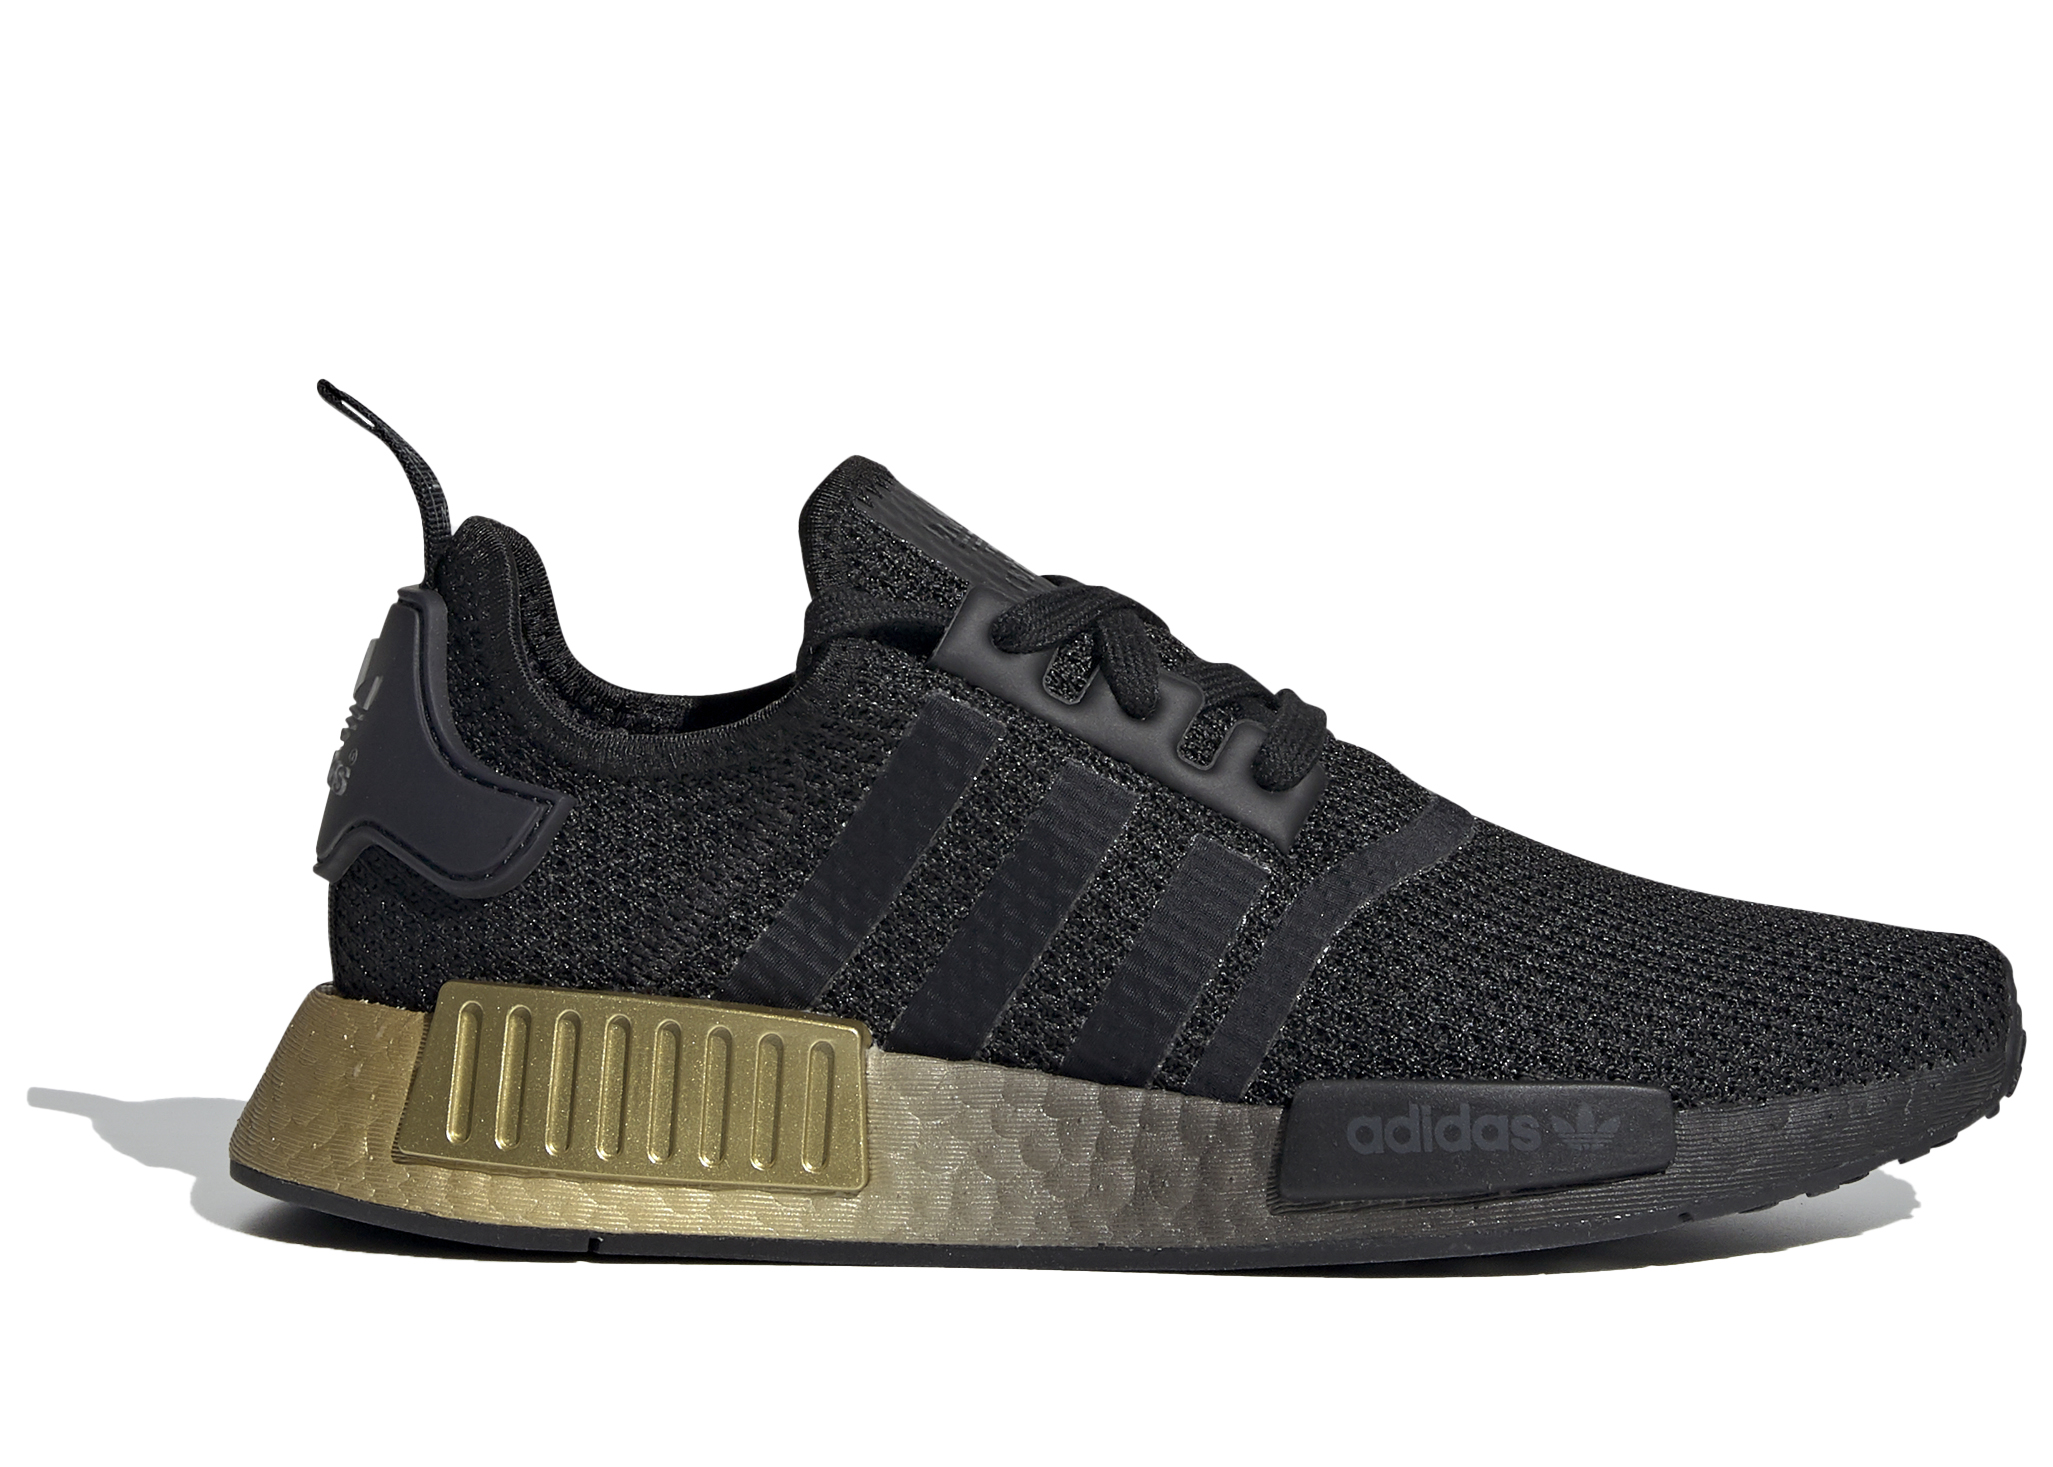 adidas nmd off white carbon core black